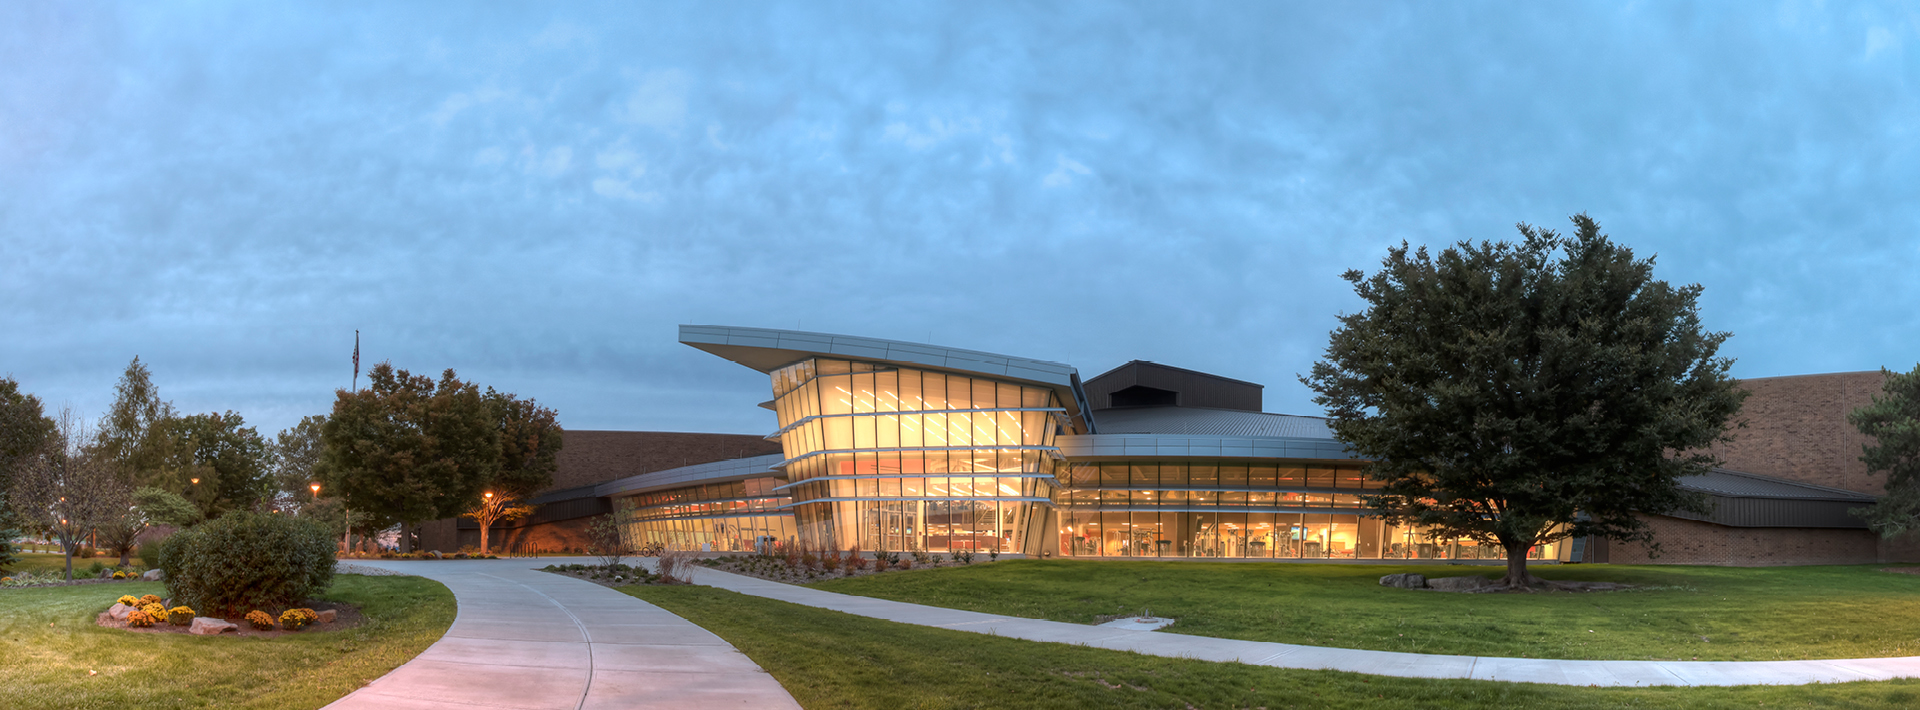 External view of the renovated BGSU rec center, we have memberships for all our community members and day passes